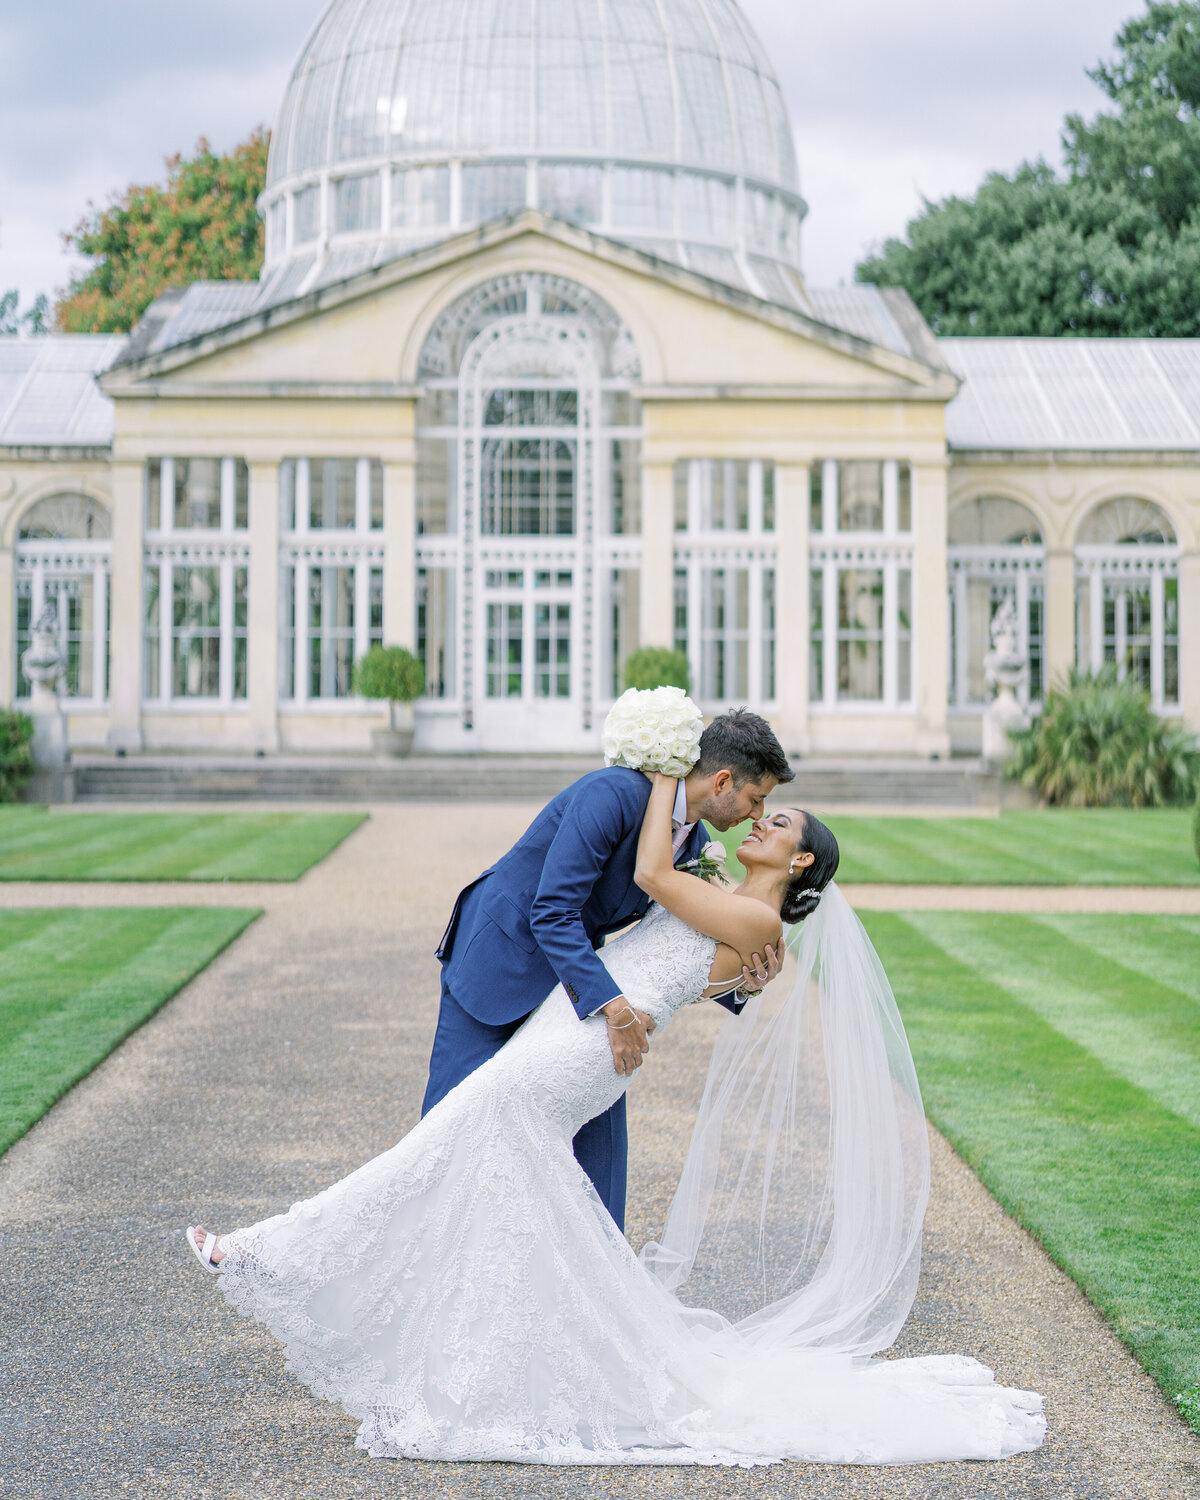 Bride and groom kissing at Syon Park wedding venue in London